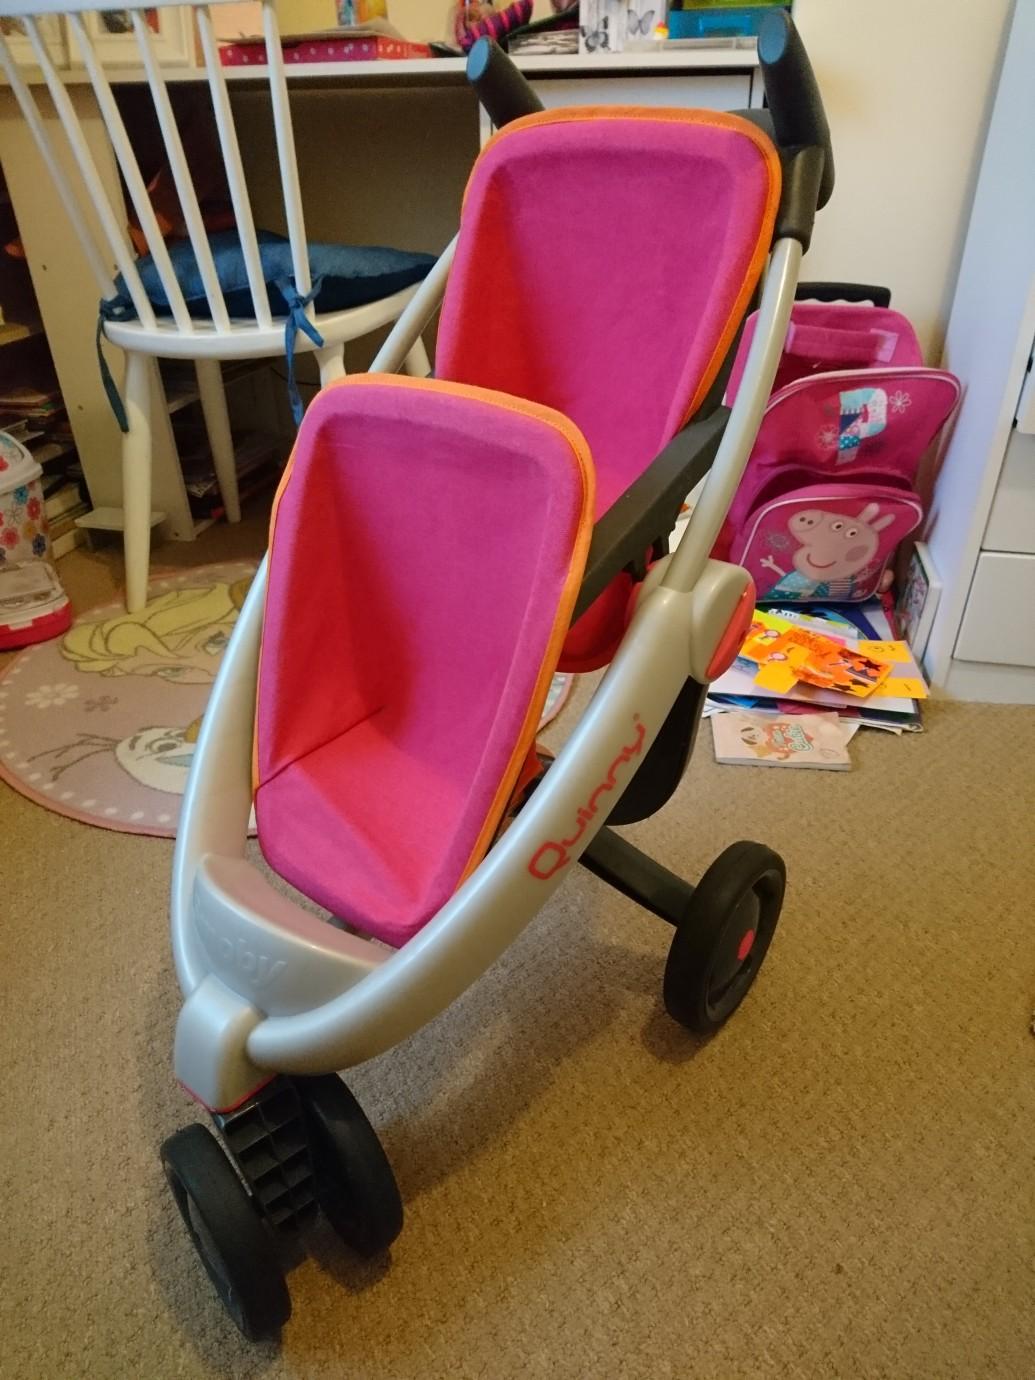 quinny dolls double buggy